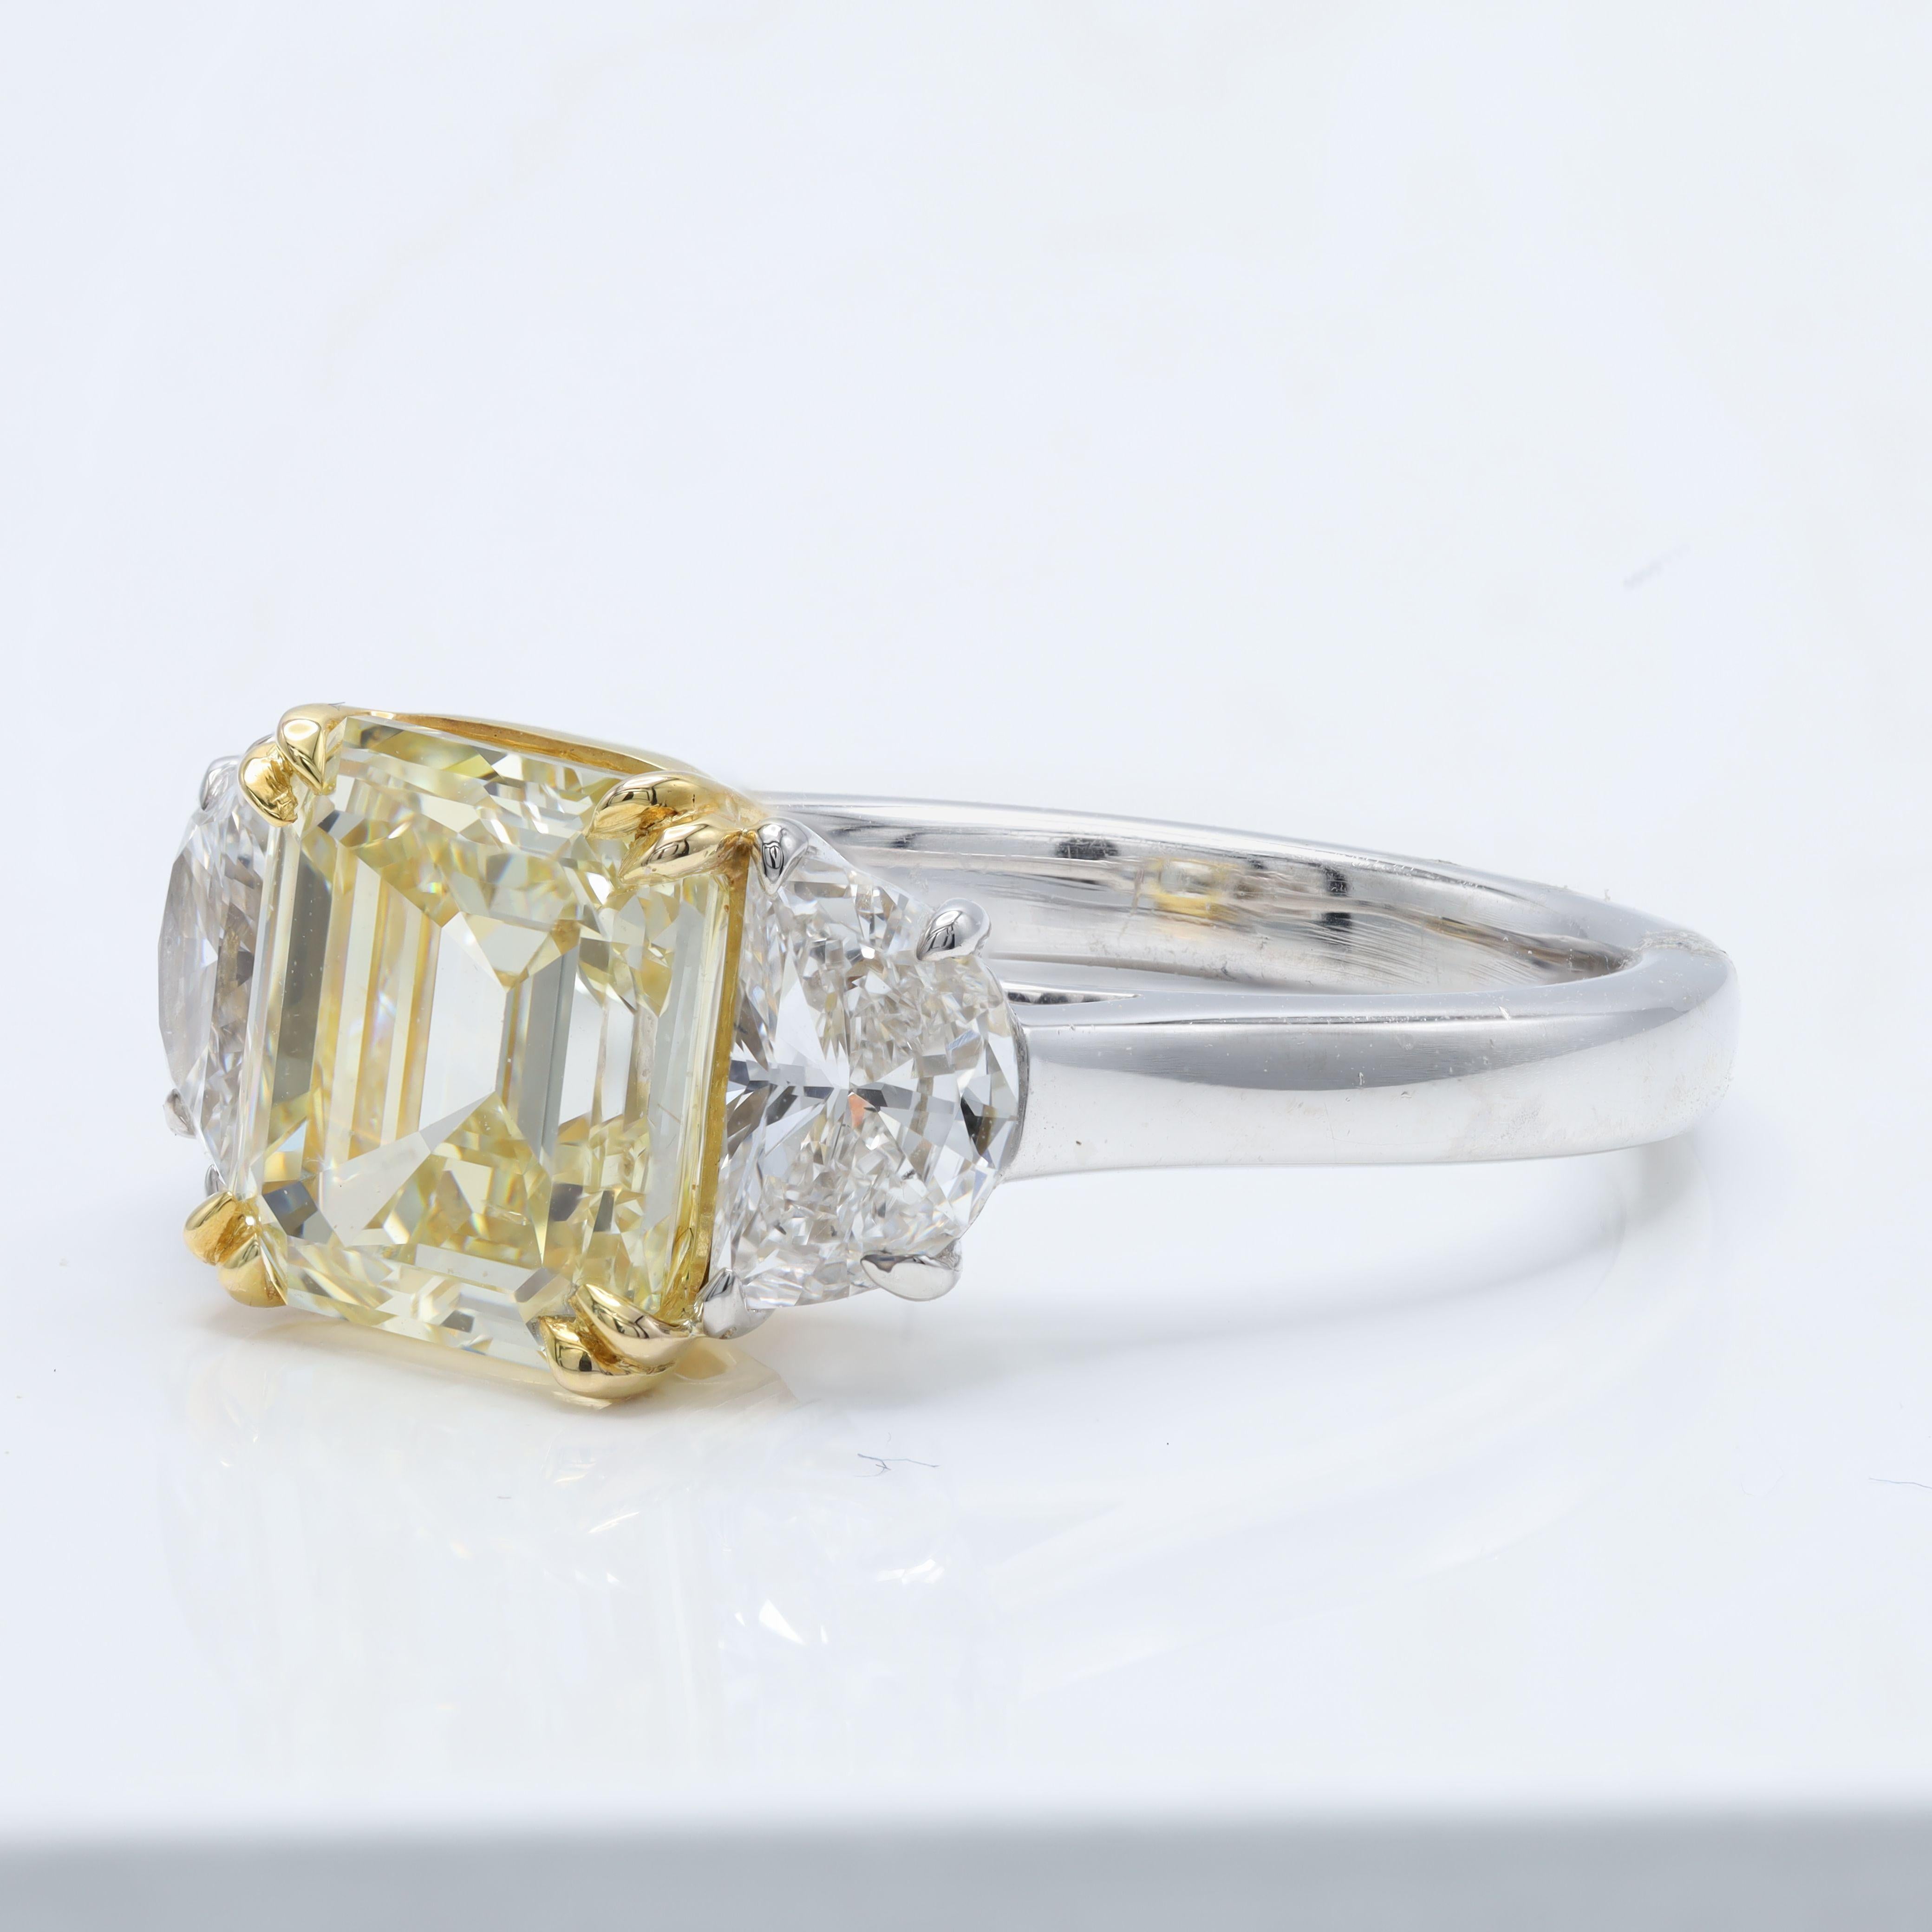 Platinum and 18 kt yellow gold engagement ring featuring a center 3.03 ct GIA certified (FY VS2) yellow diamond with 0.95 cts tw of half moon shaped white diamonds on the sides
Diana M. is a leading supplier of top-quality fine jewelry for over 35